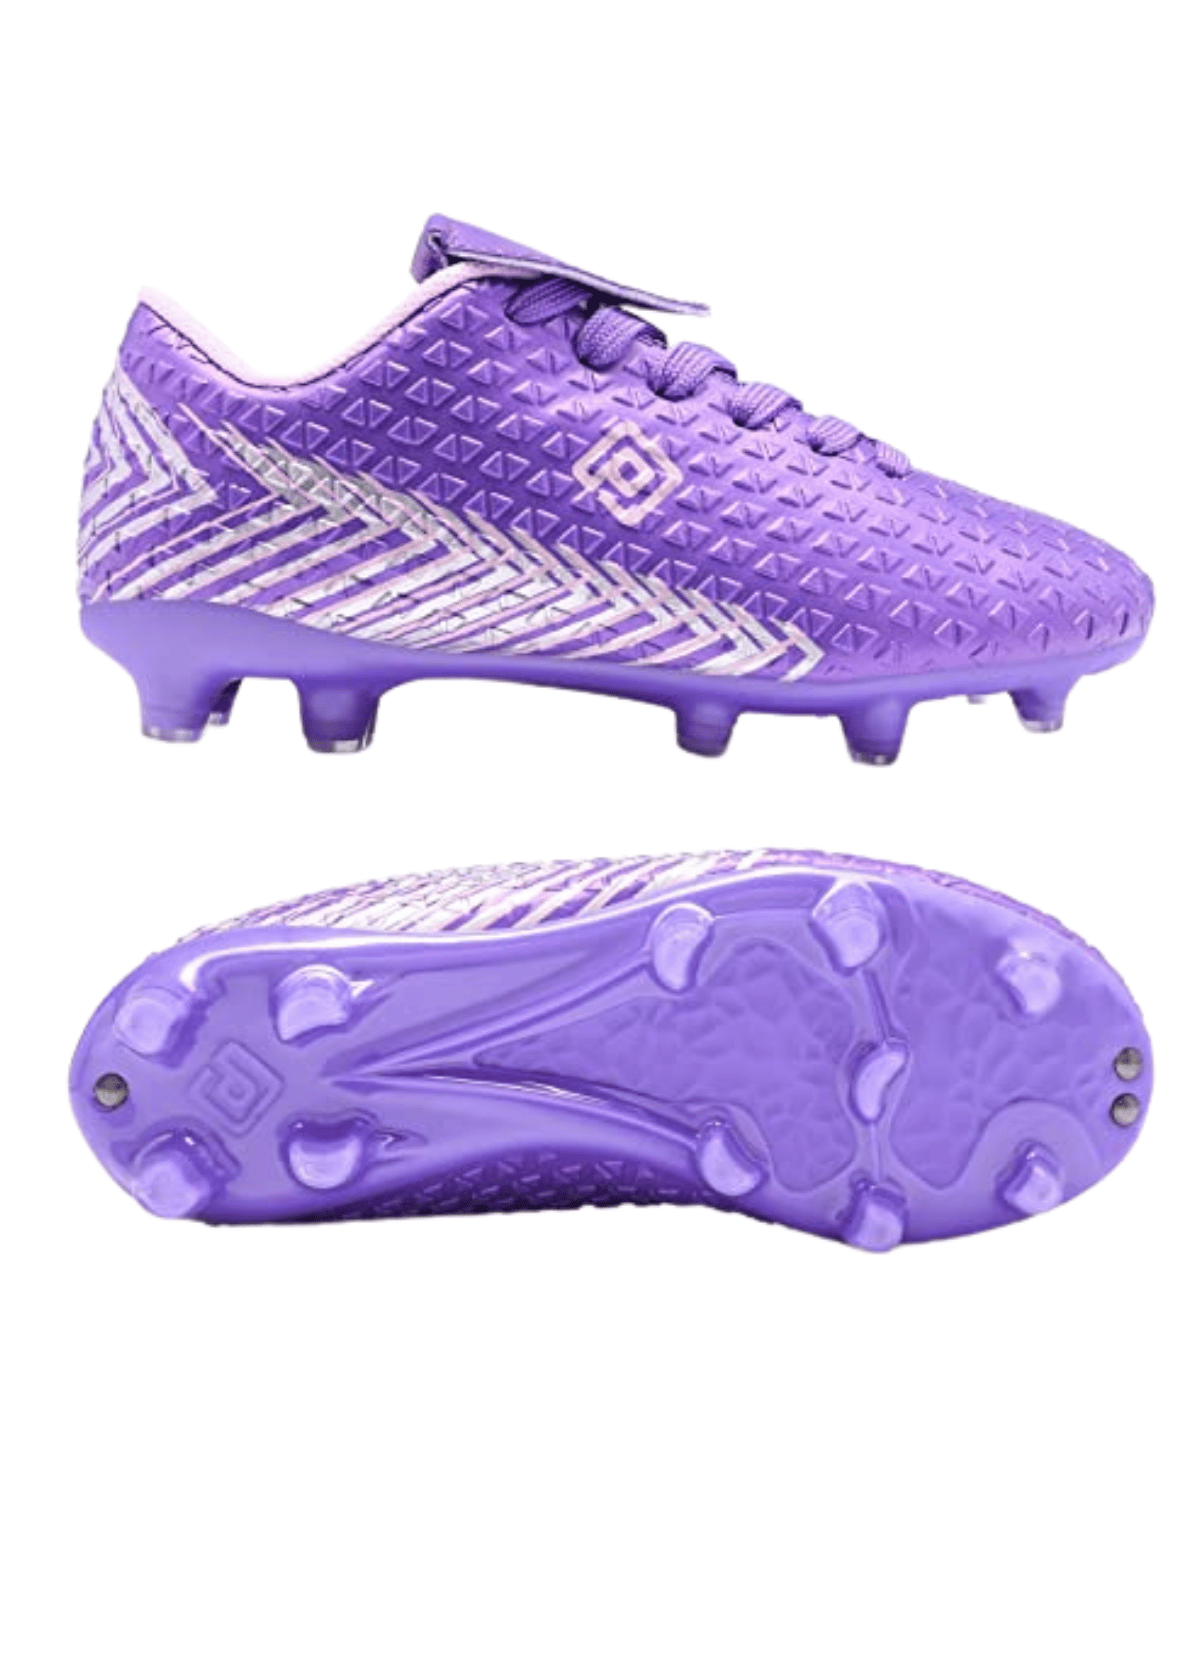 Best Purple Soccer Cleats for Power Plays: Kids Edition